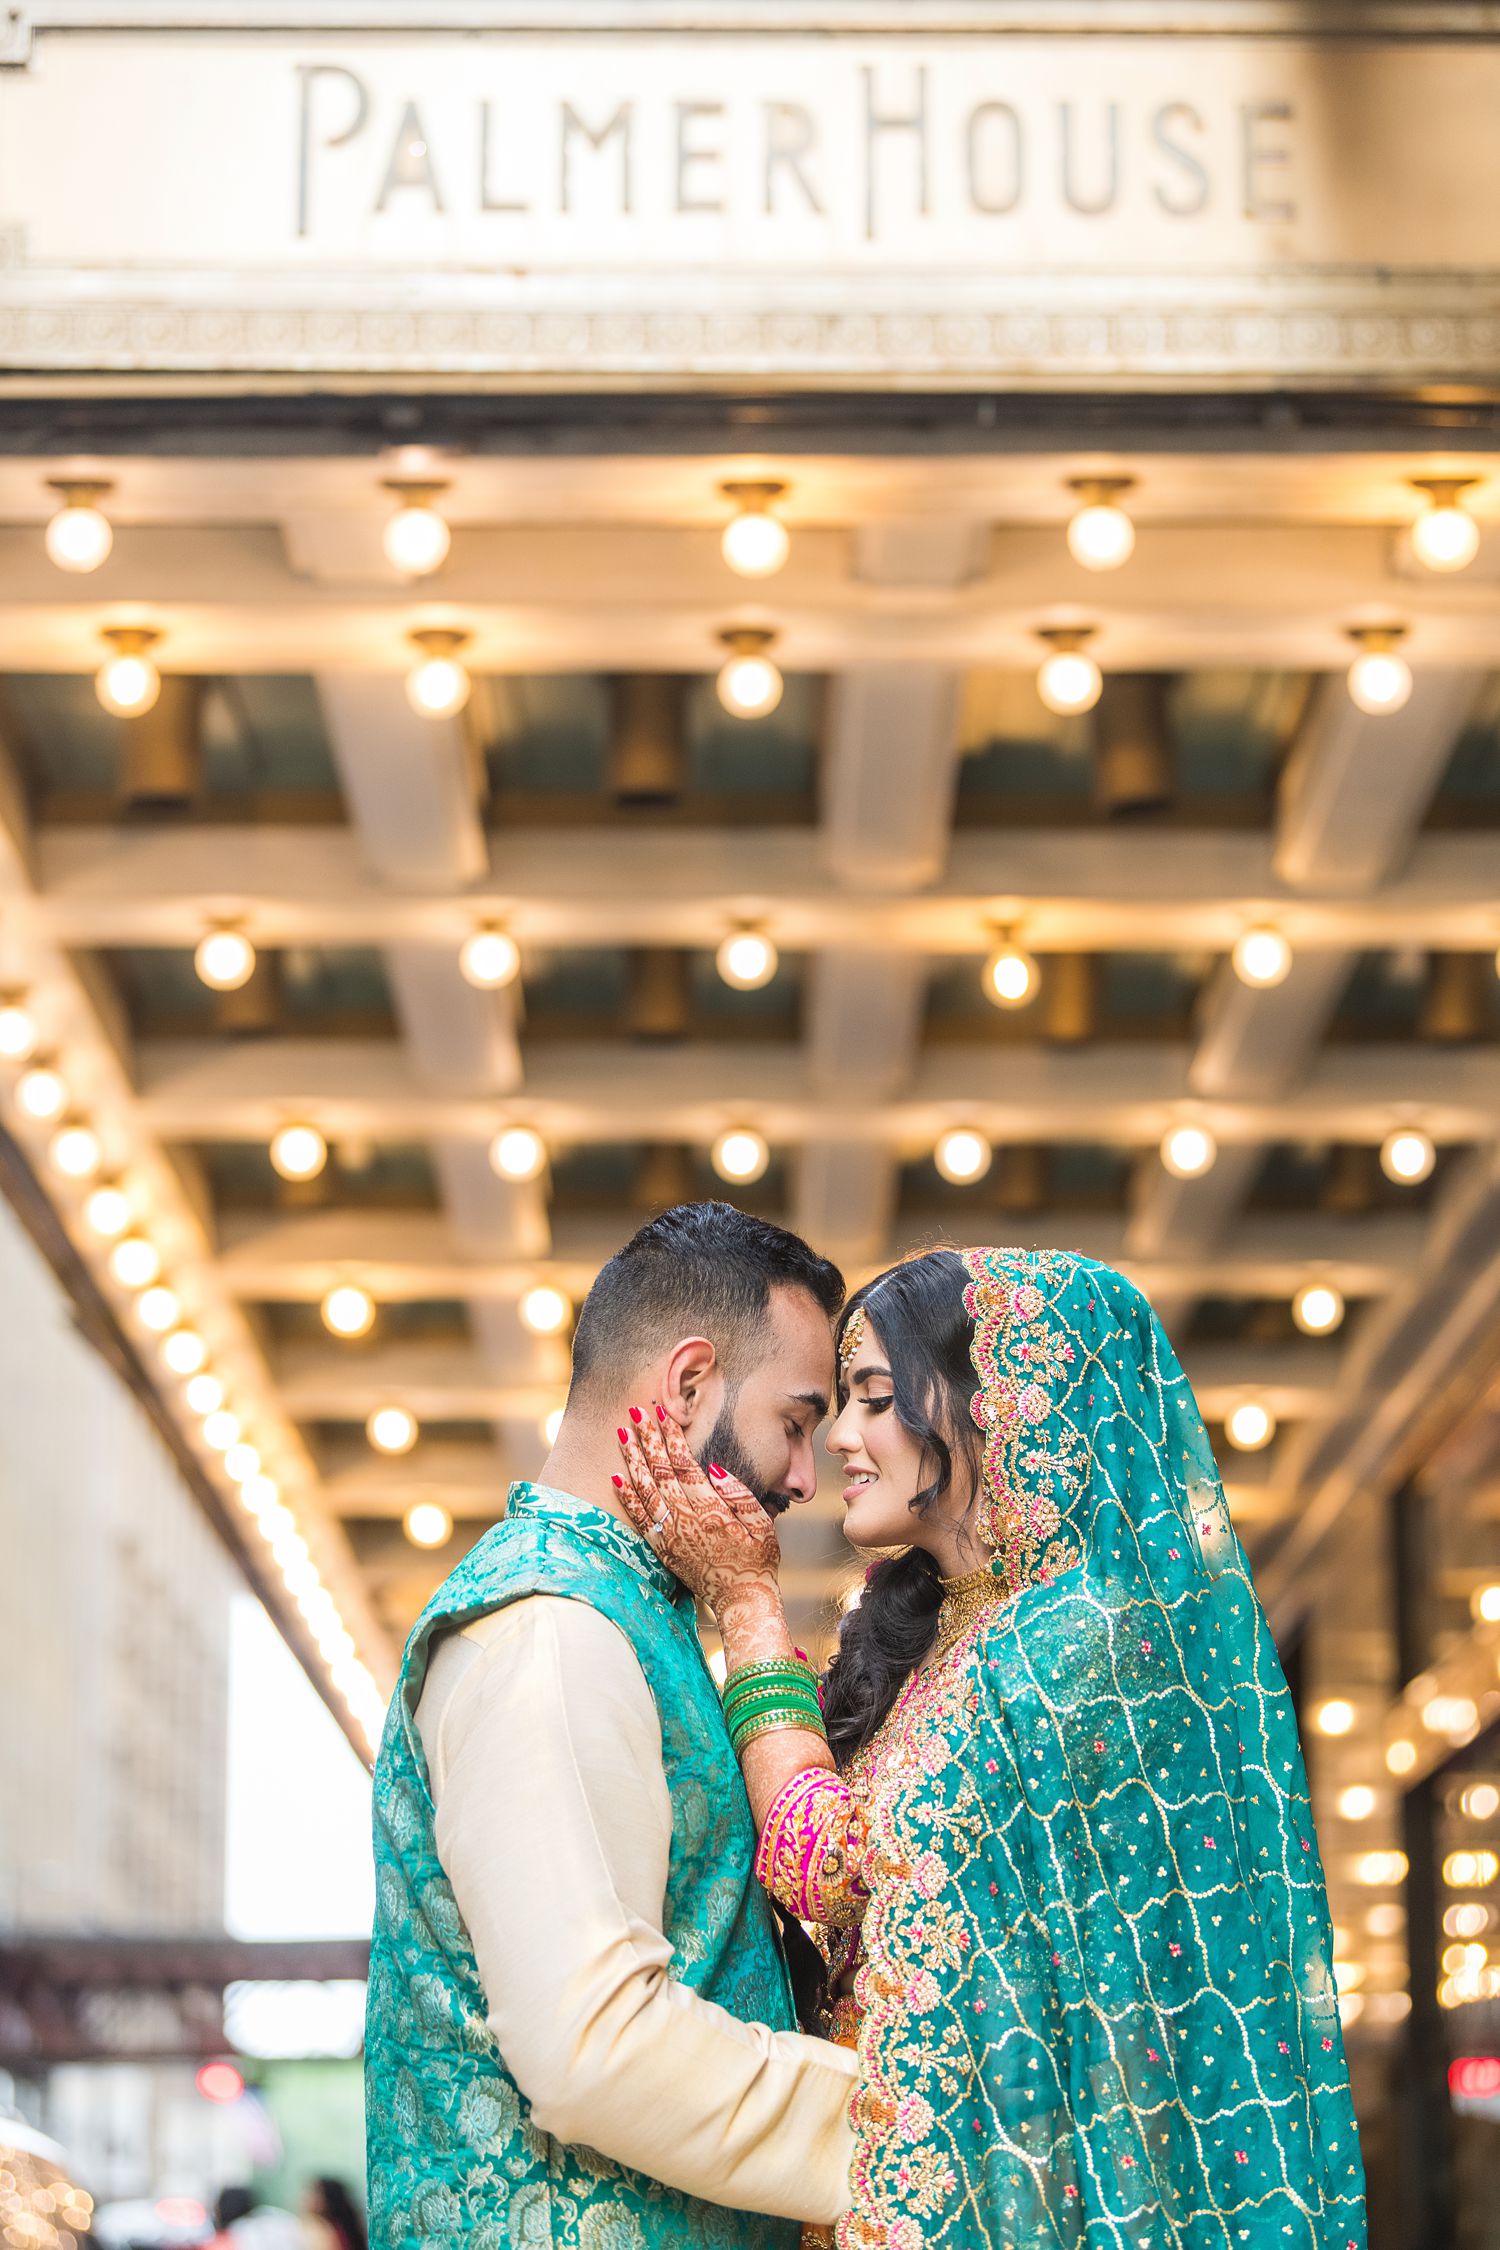 Teal Mehndi Outfit on Pakistani Bride and Groom portrait by Maha Studios at Palmer House Chicago